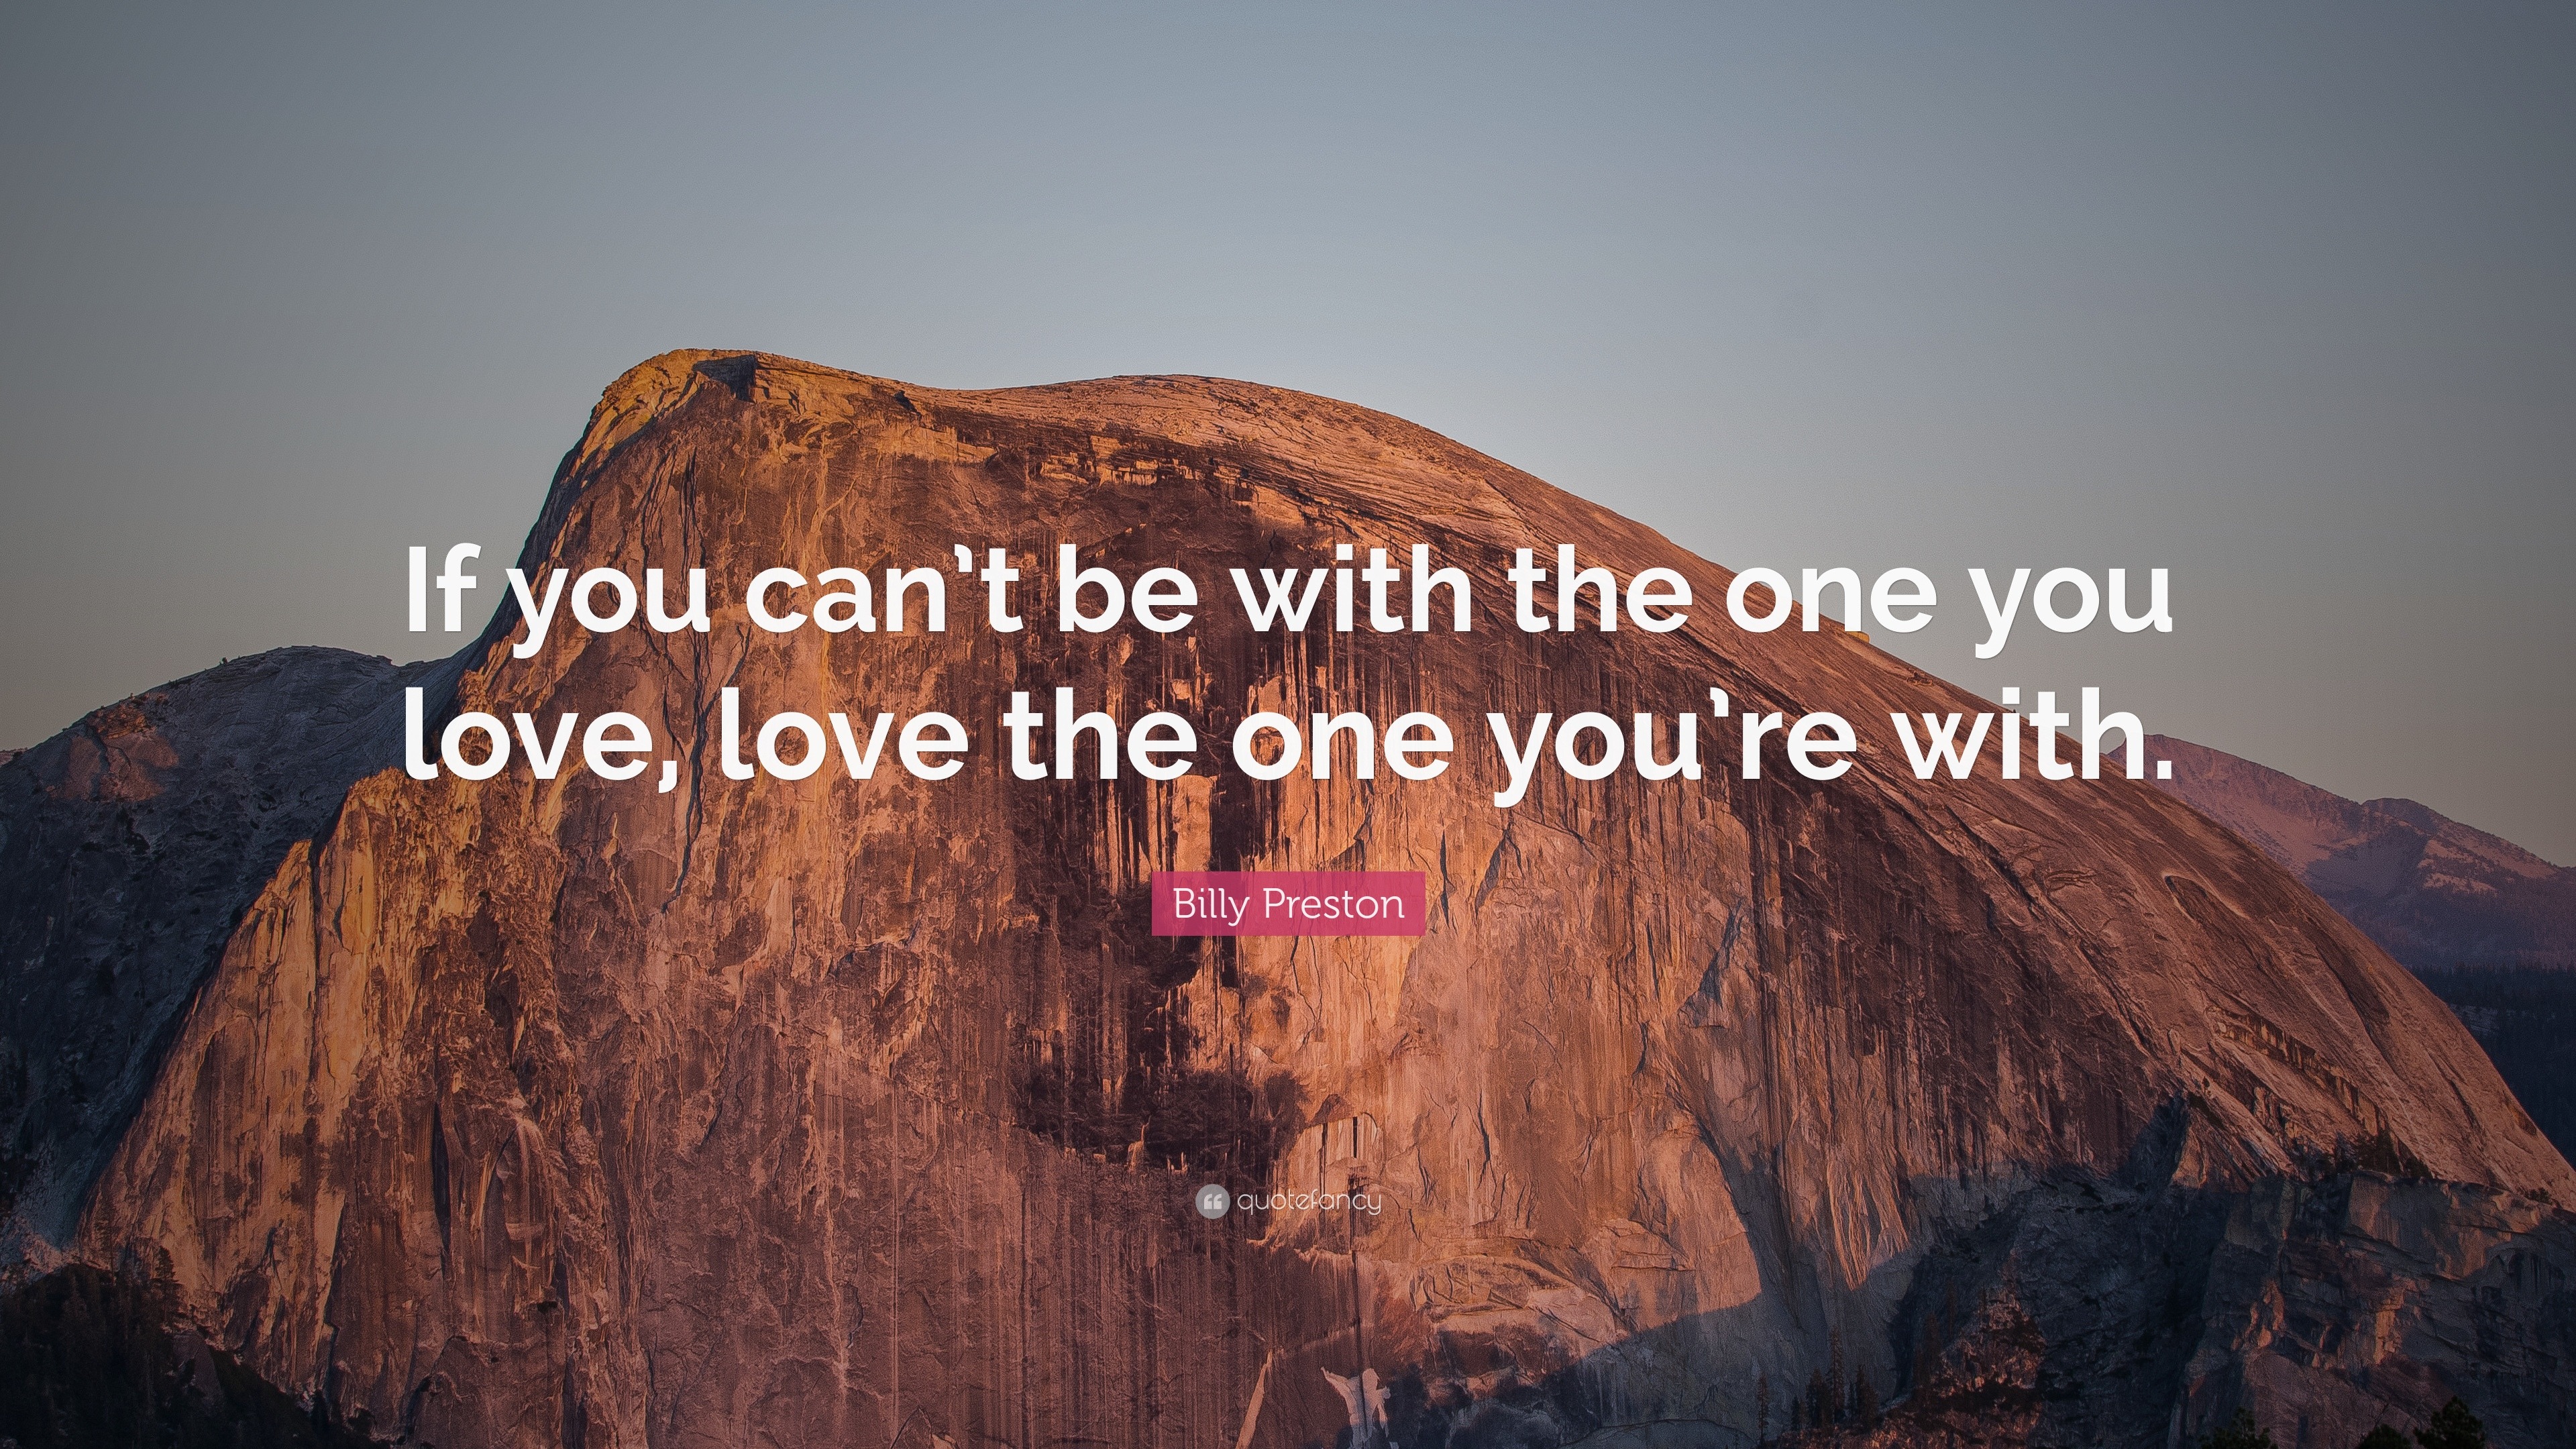 Billy Preston Quote “If you can t be with the one you love